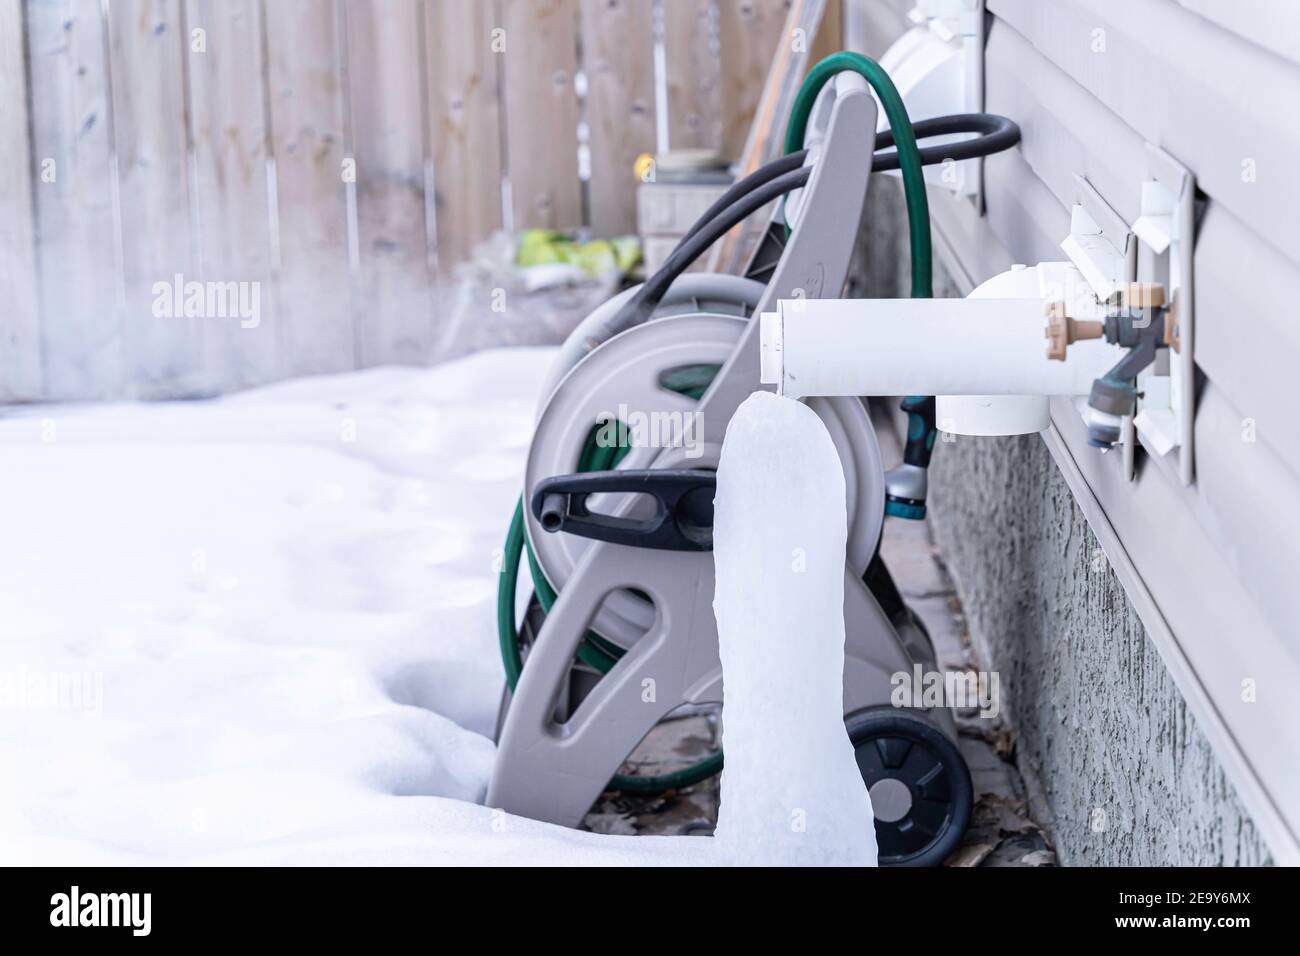 Furnace exhaust pipe blowing out steam in winter Stock Photo